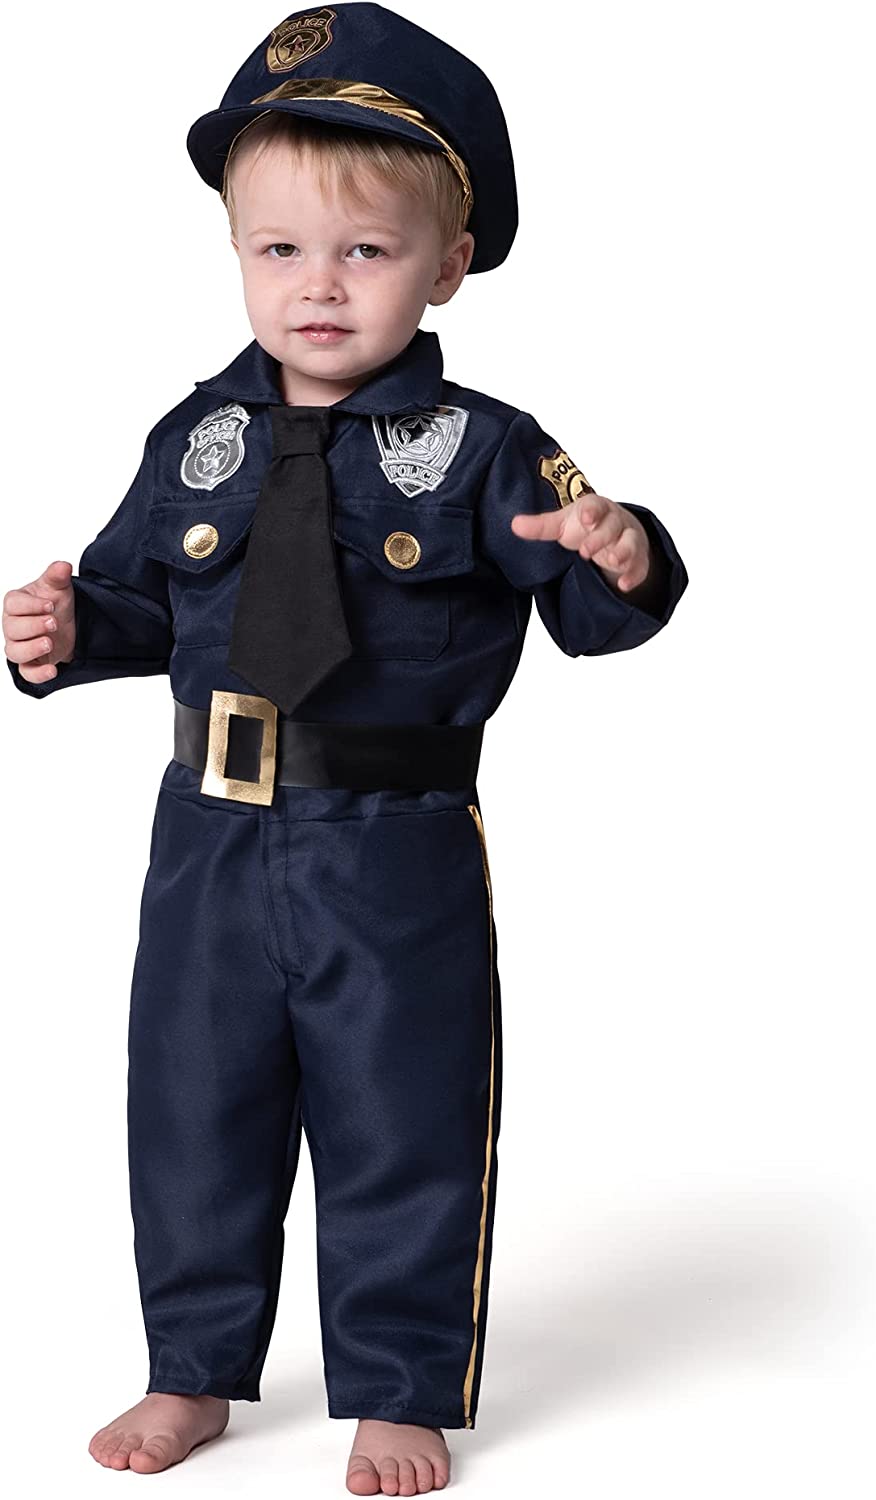 Boy's Policeman Costume - Police Officer Costume - BOY'S COSTUMES